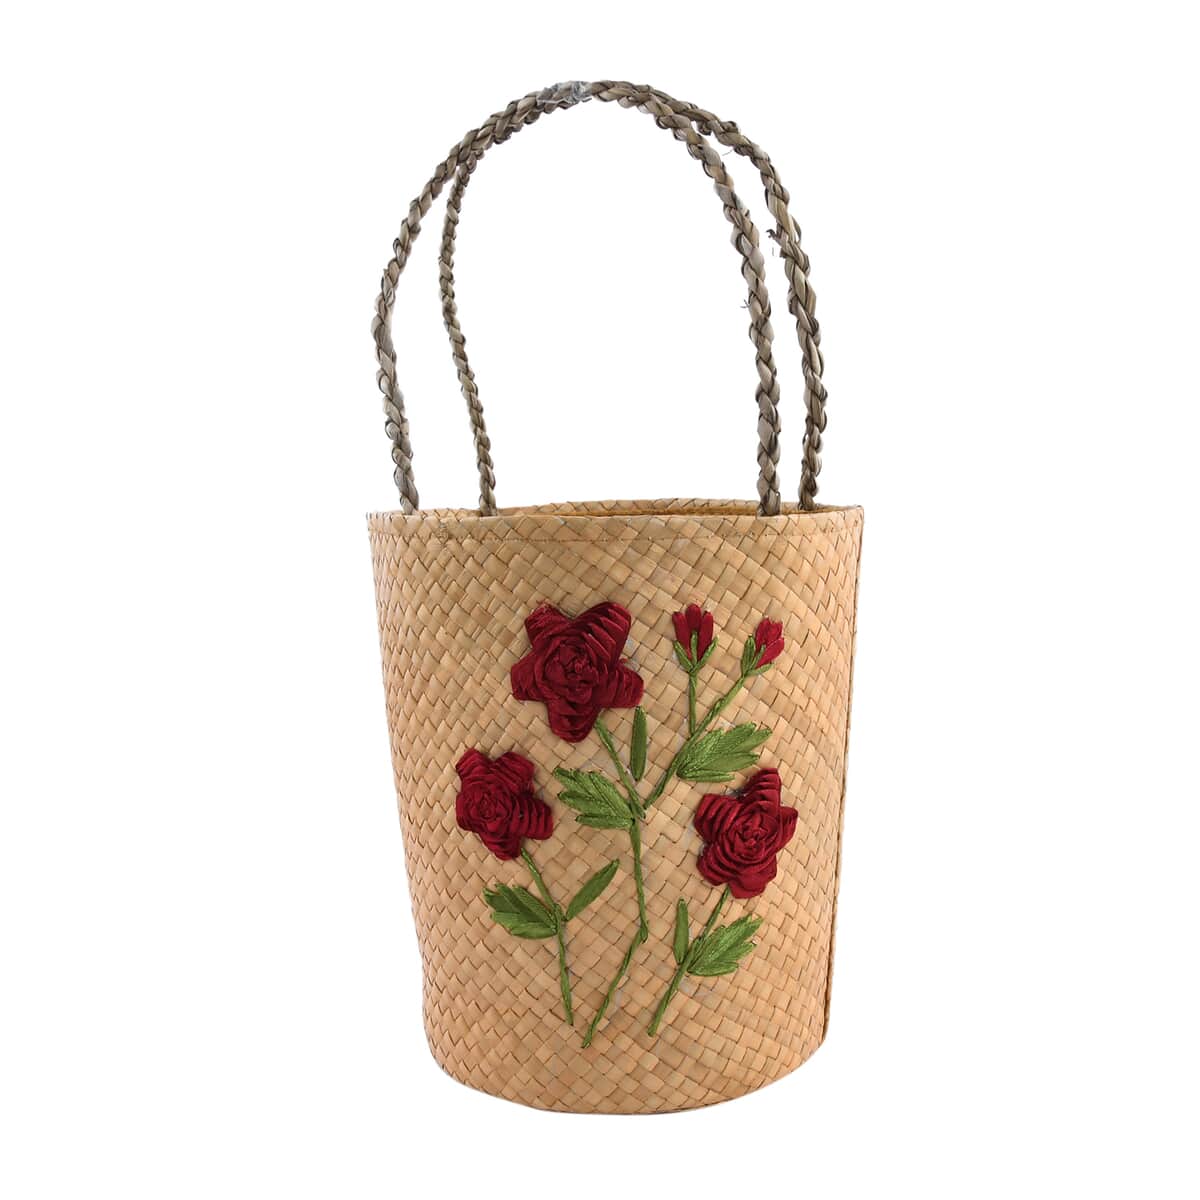 Black Embroidered with Floral Handmade Pandan Woven Basket Bag (5.91"x5.91"x7.87") image number 0